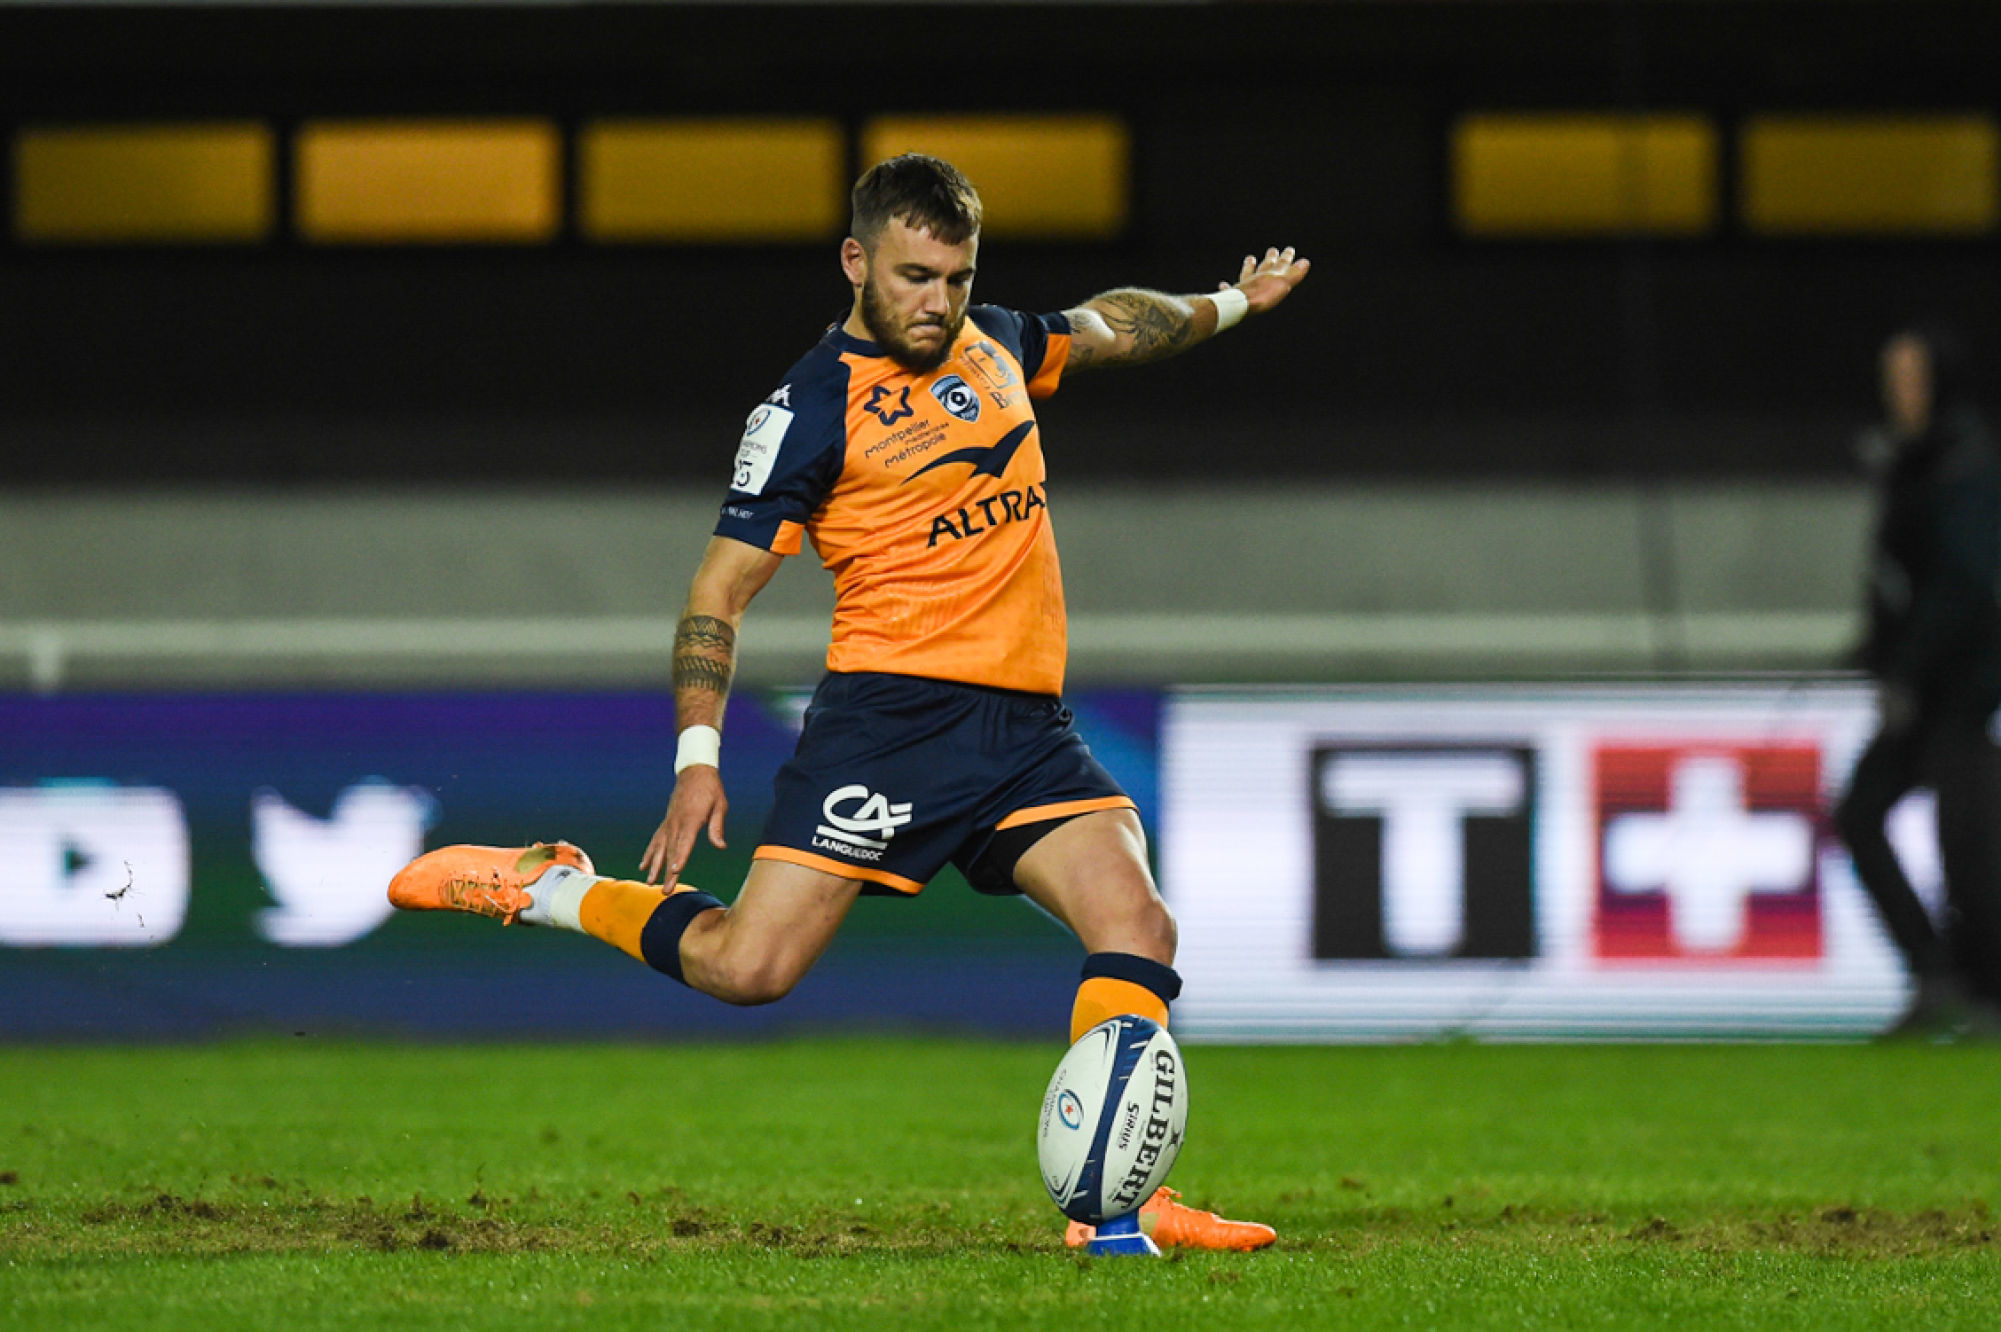 Benoit PAILLAUGUE of Montpellier  during the European Rugby Champions Cup, Pool 5 match between Montpellier and Gloucester on November 24, 2019 in Montpellier, France. (Photo by Alexandre Dimou/Icon Sport) - Benoit PAILLAUGUE - Altrad Stadium - Montpellier (France)